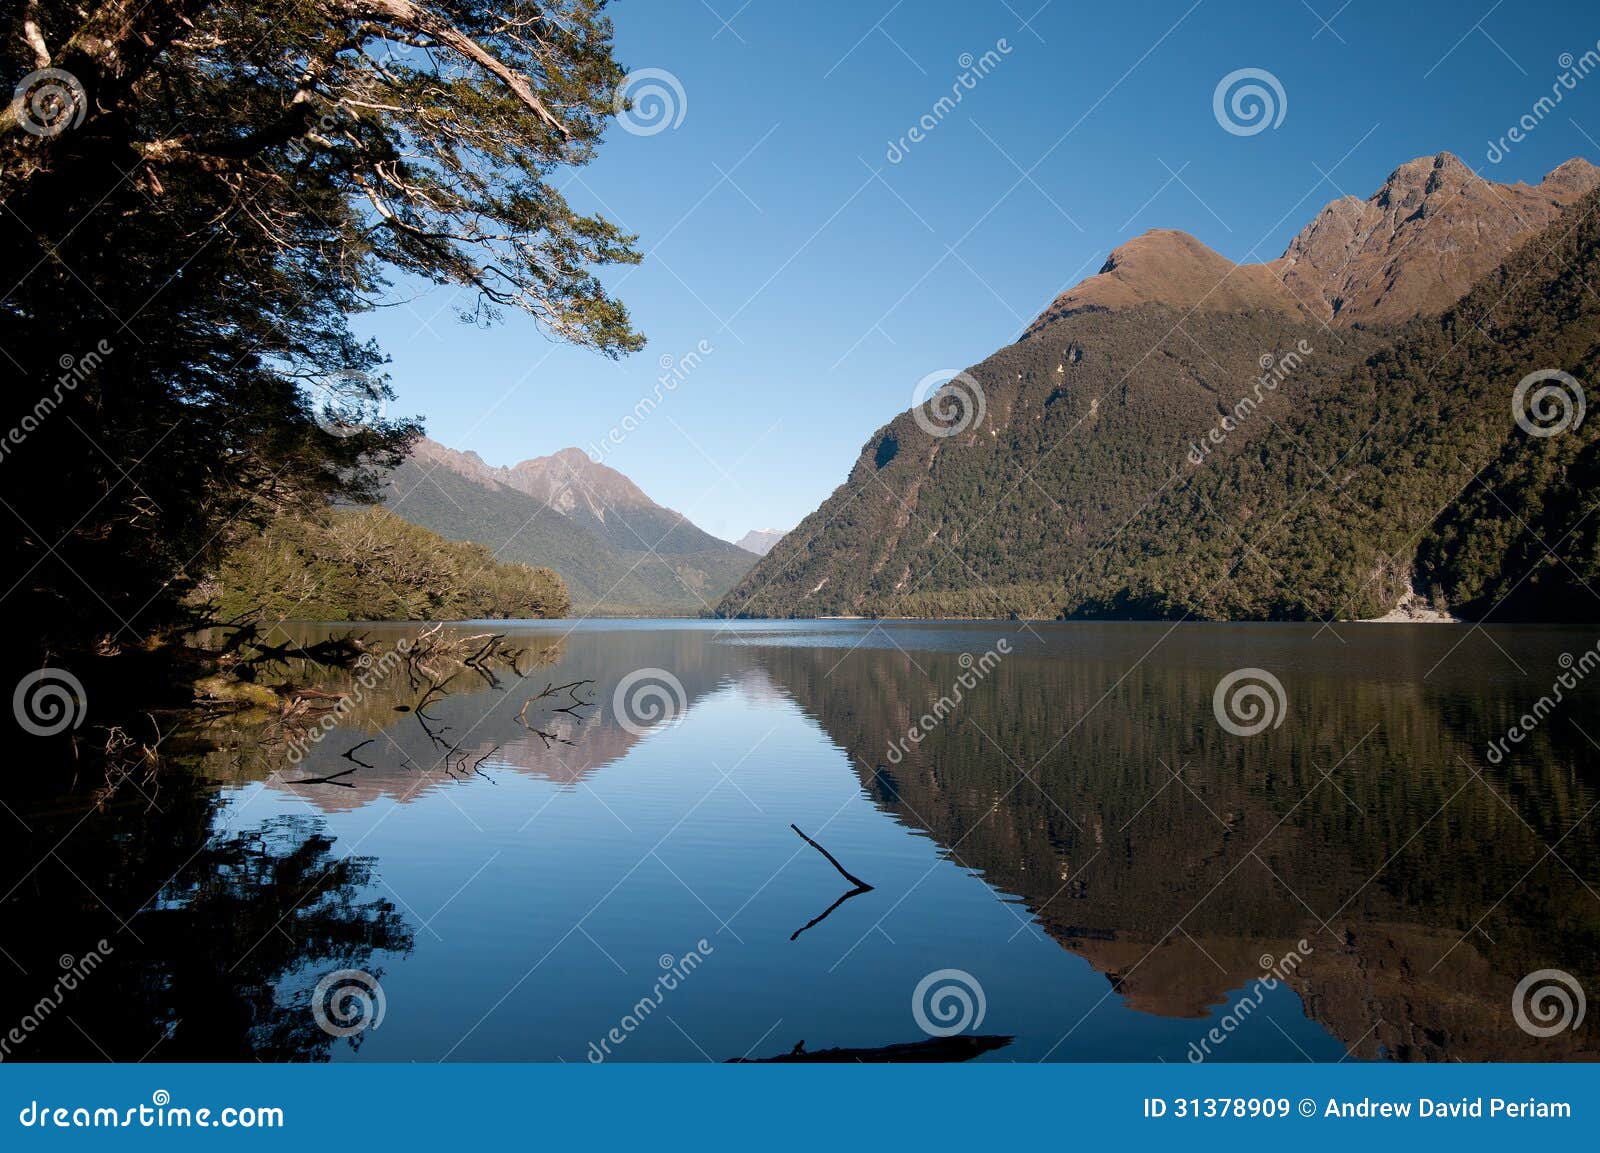 Scenic landscape of Mountains reflected in a lake in New Zealand.